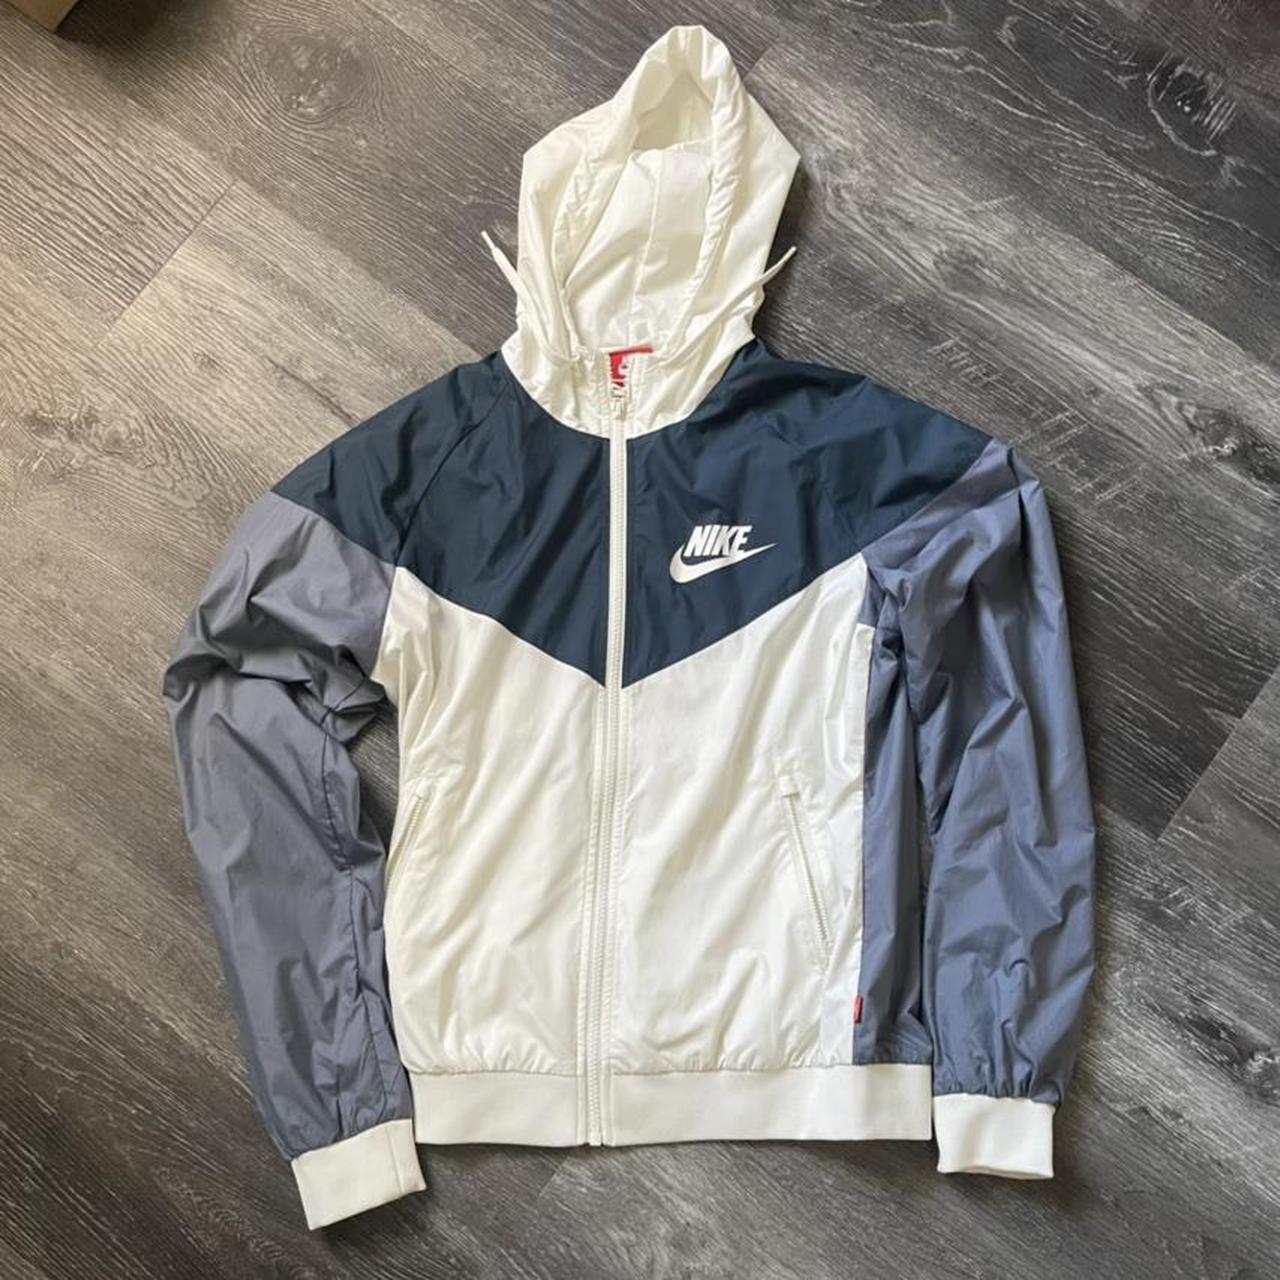 NIKE hooded windbreaker Color - blue and white Size... - Depop